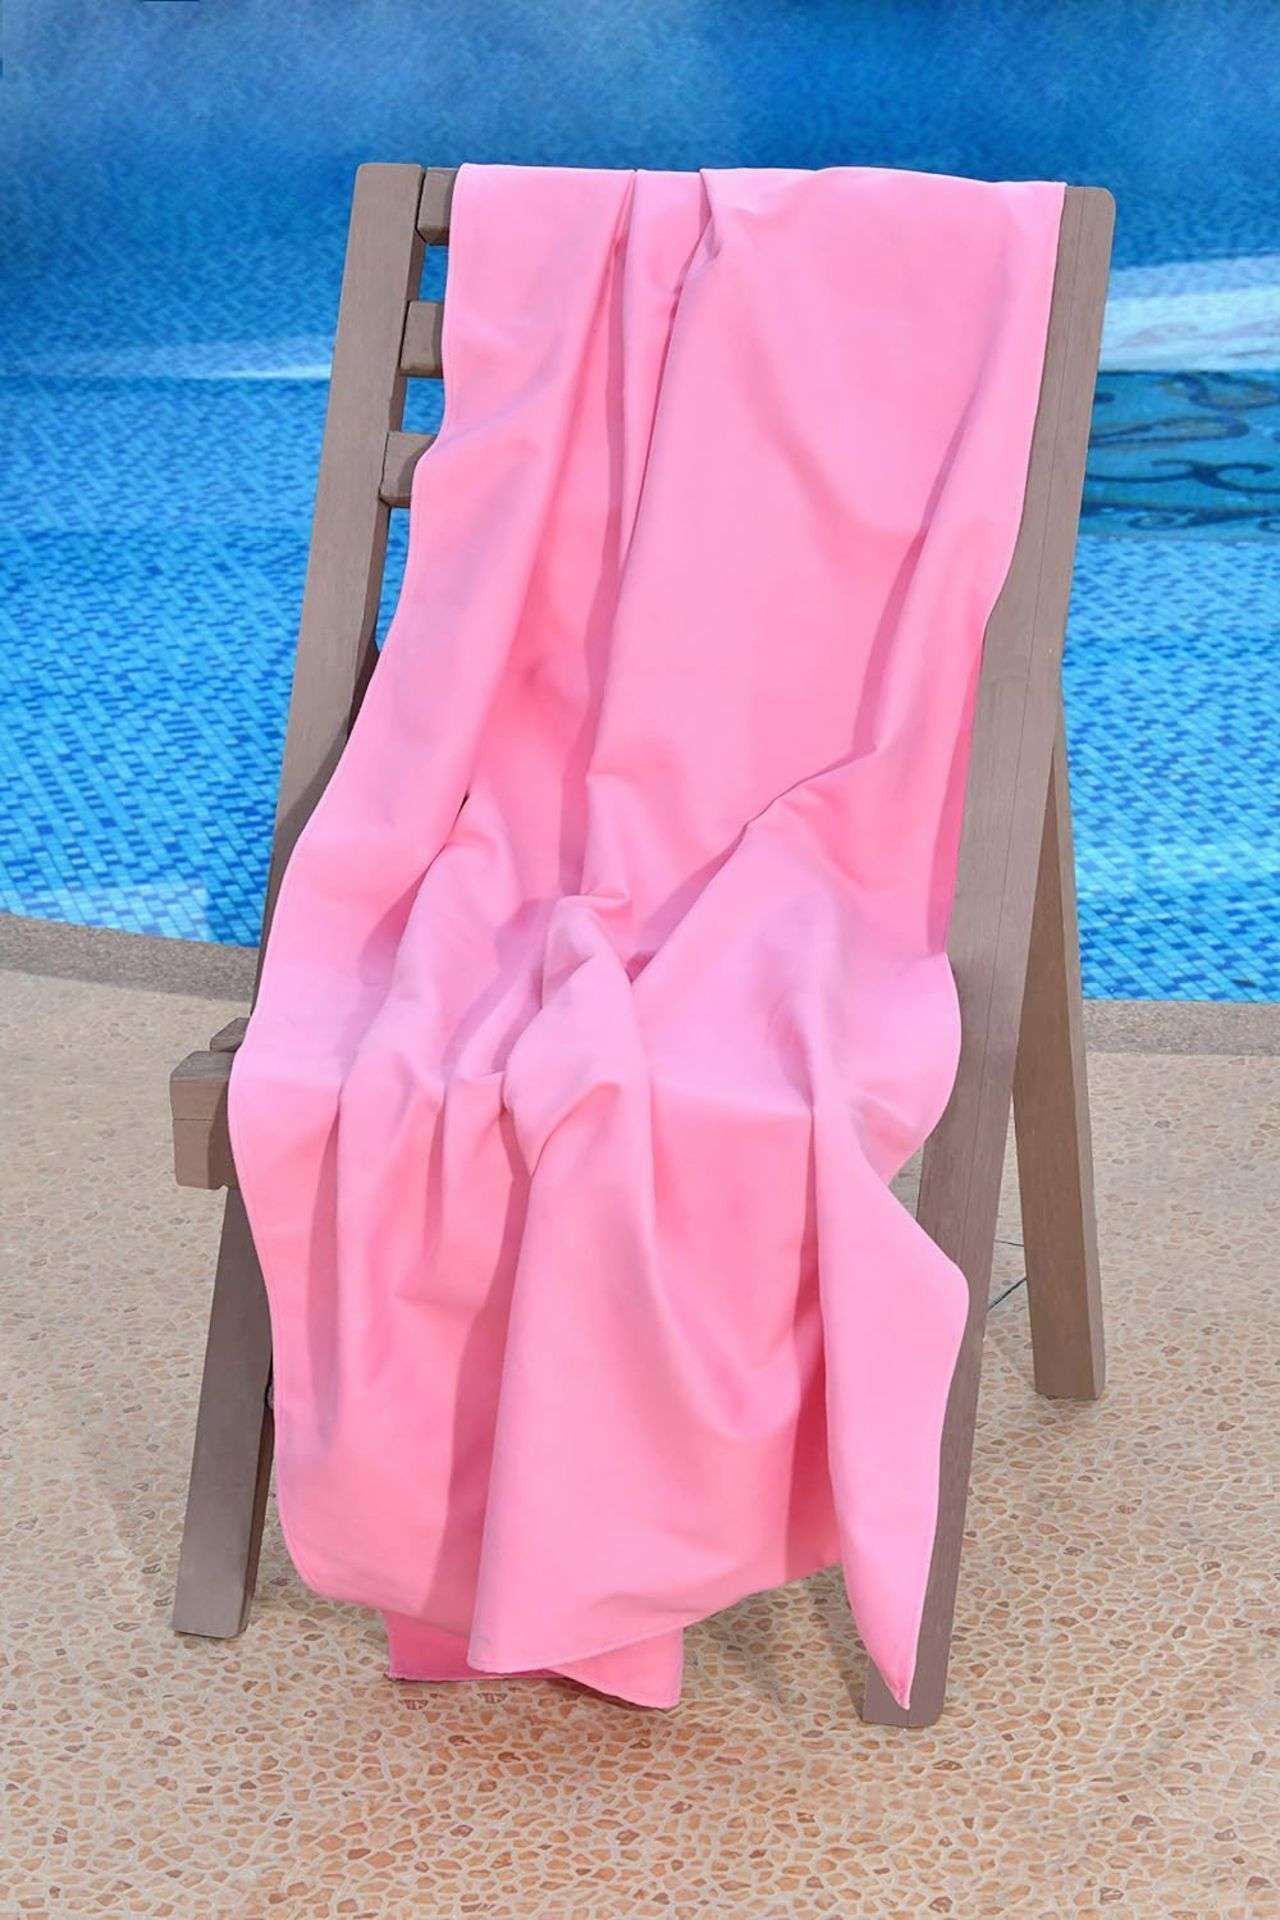 11x NEW & PACKAGED SLEEPDOWN Quick Dry Beach Towel 90 x 160cm With Carry Pouch - PINK. RRP £21.99